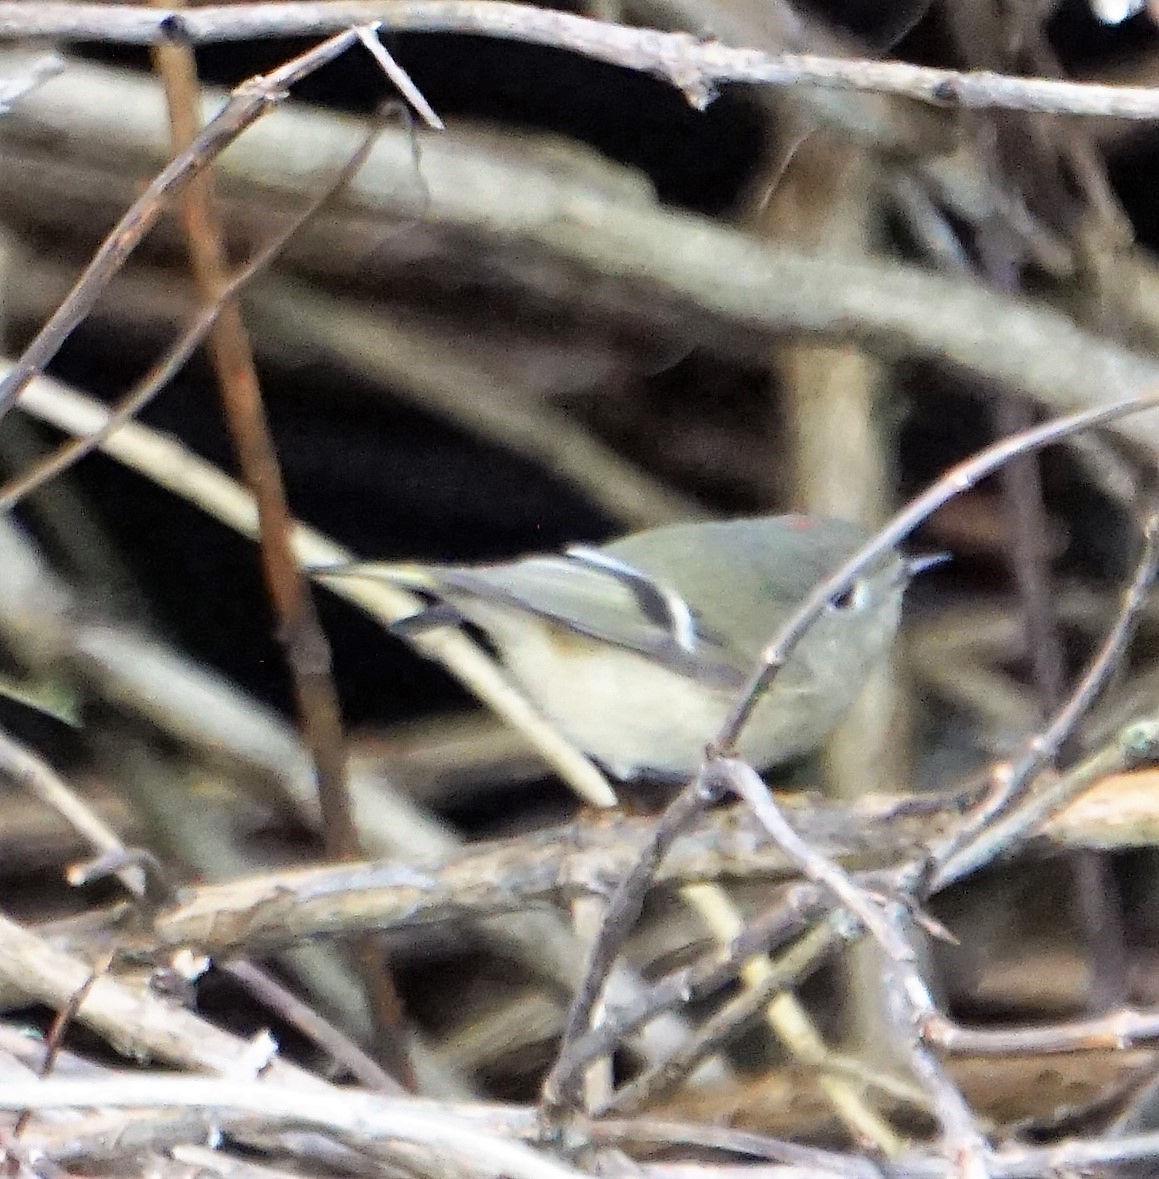 Ruby-crowned Kinglet - Anonymous